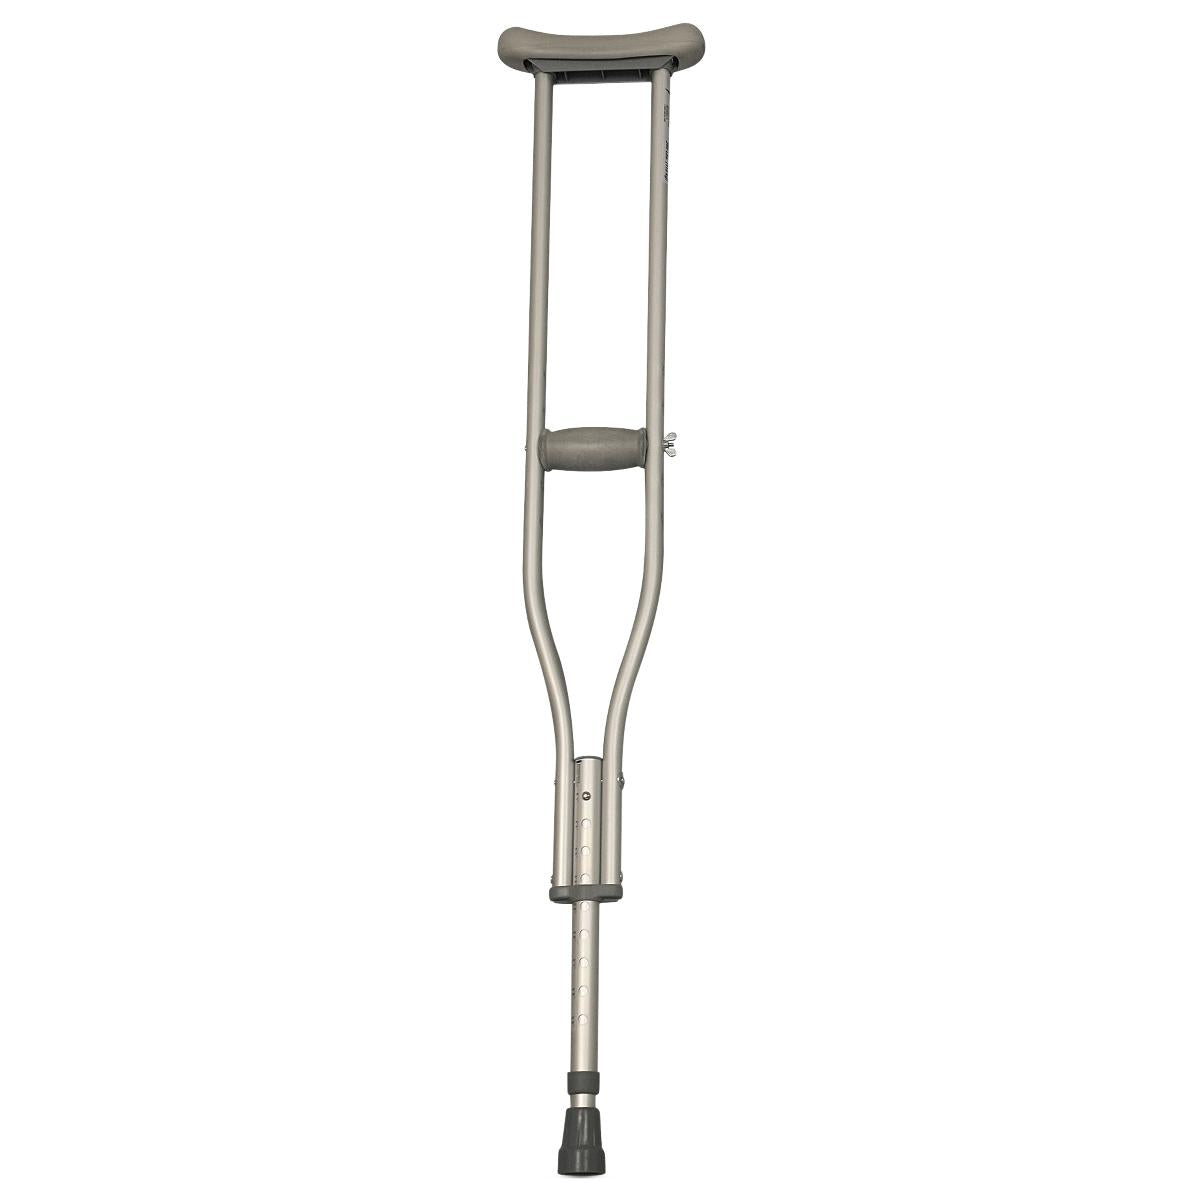 1 Pair-Pair / 5'10"- 6'6" / Axillary Patient Safety & Mobility - MEDLINE - Wasatch Medical Supply